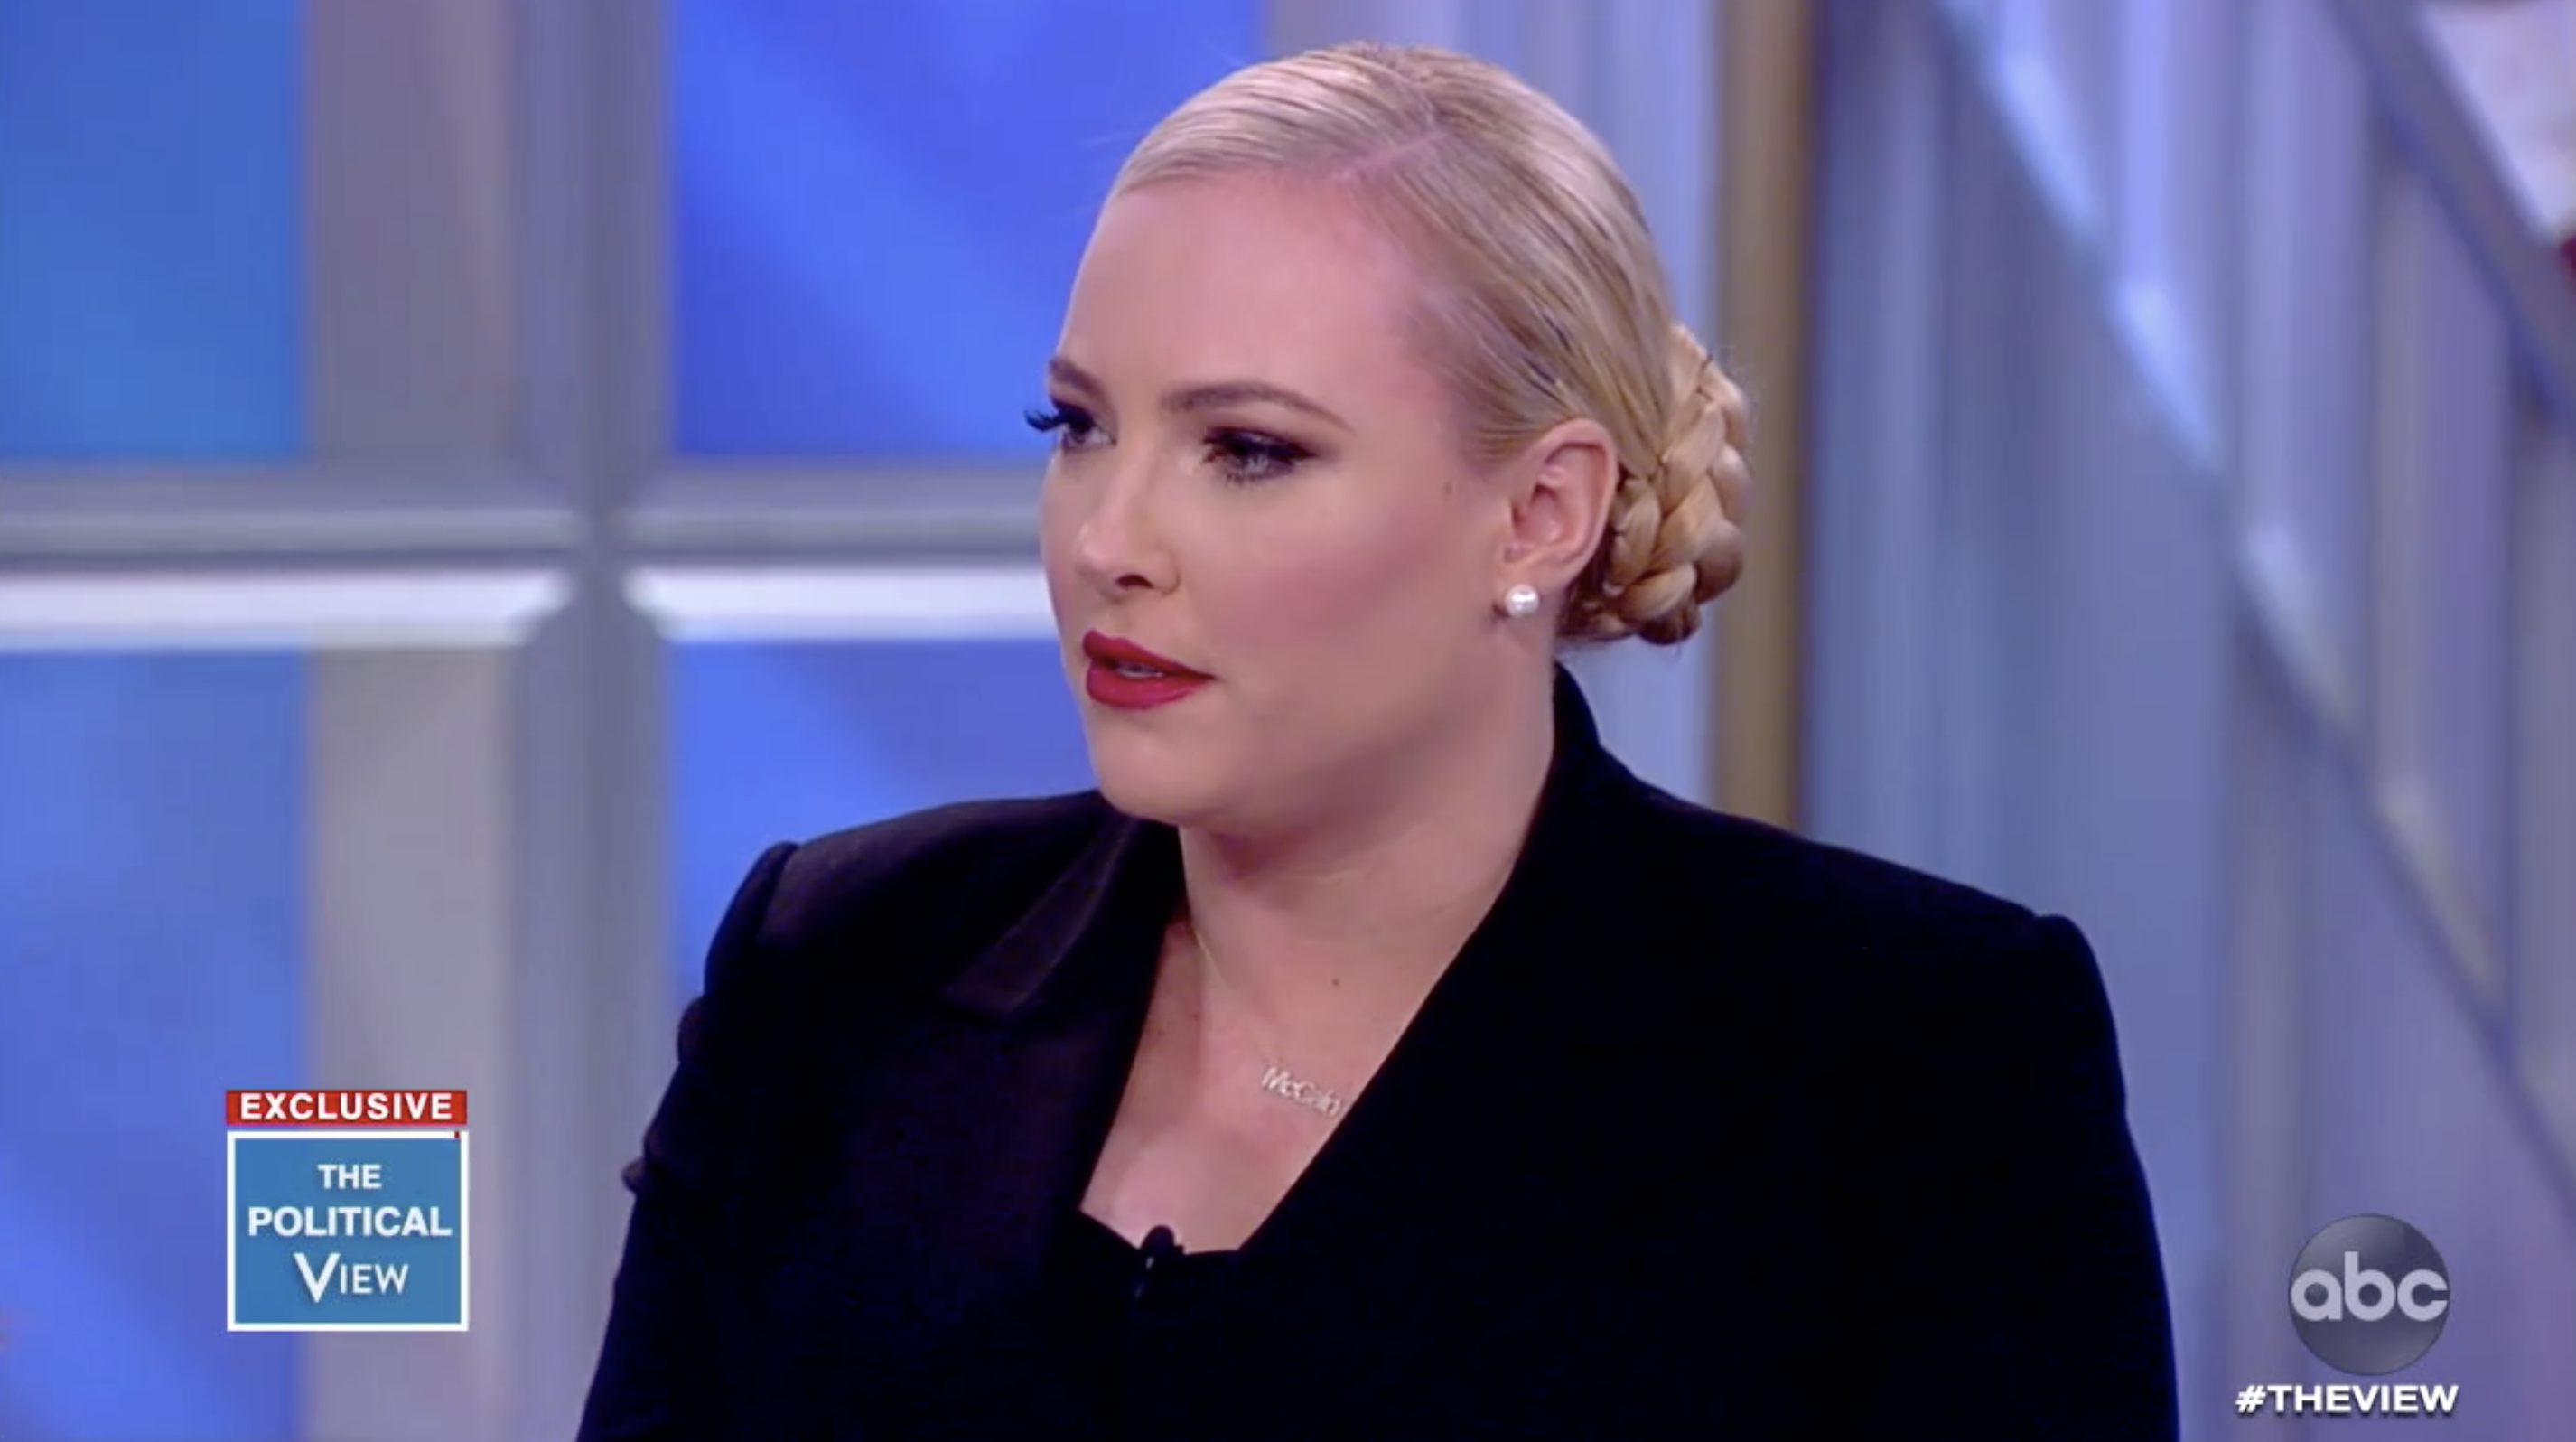 'The View' co-host Meghan McCain spars with Donald Trump Jr.: 'Is it worth it?'